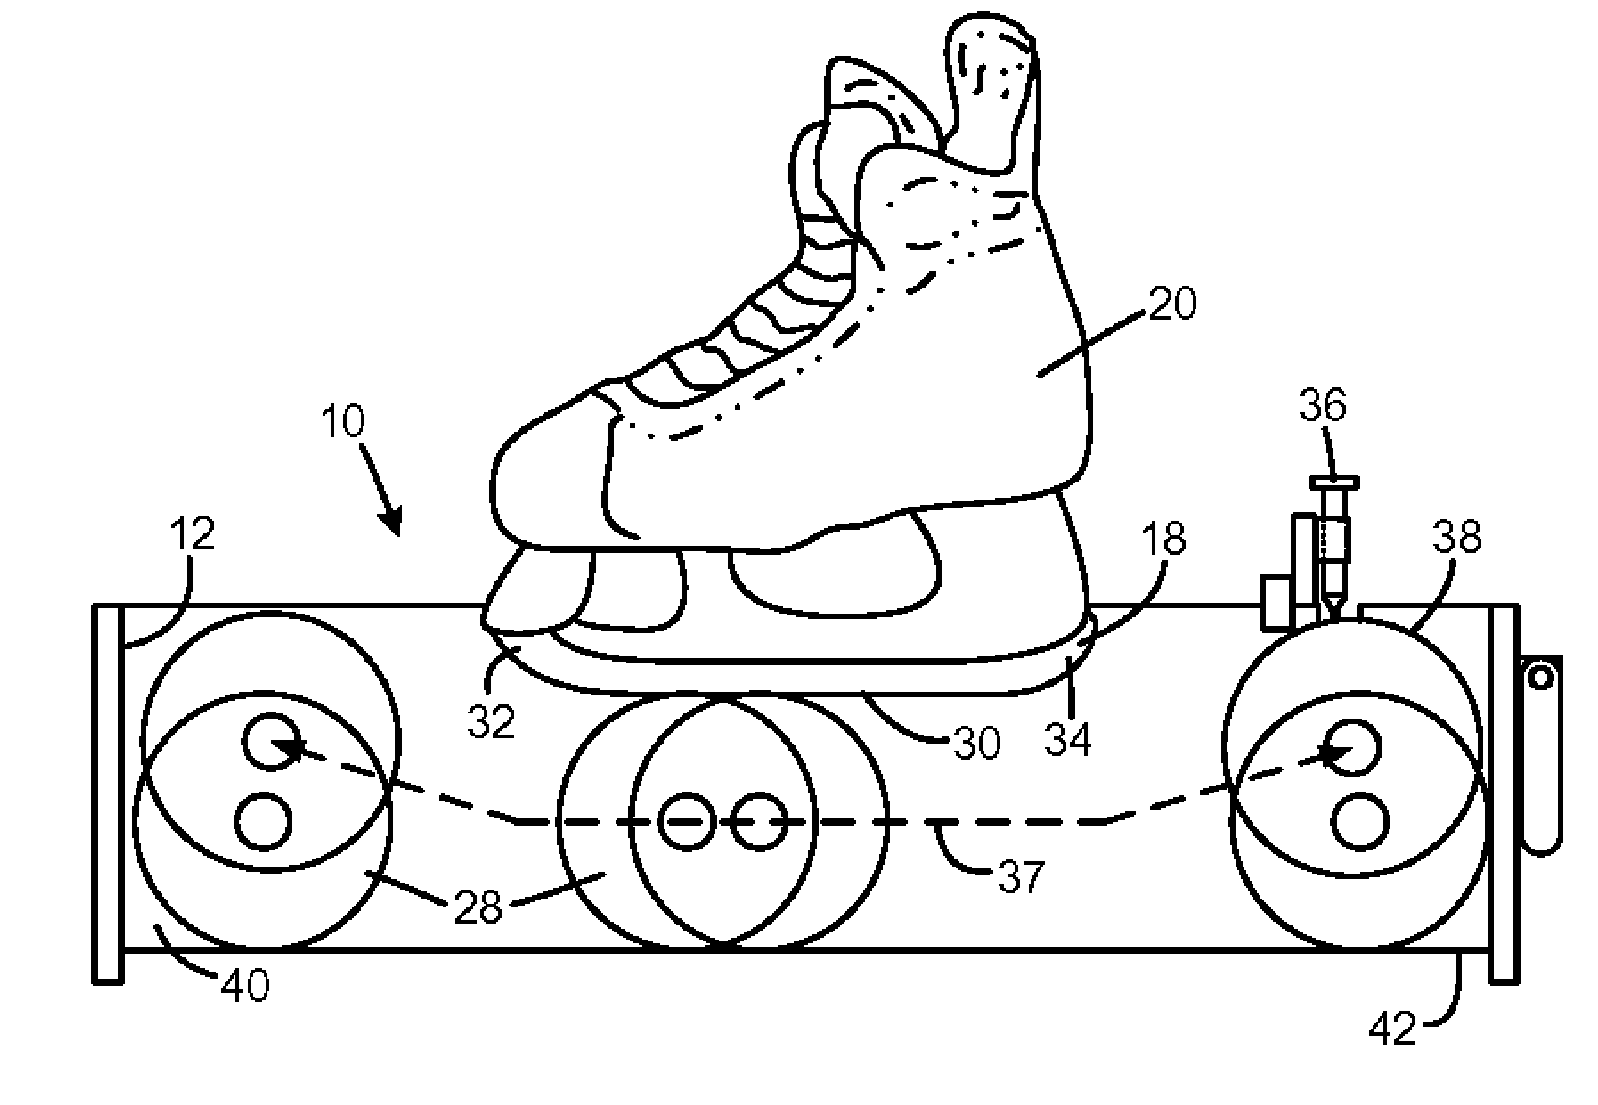 Automatic sharpening system for ice-skates